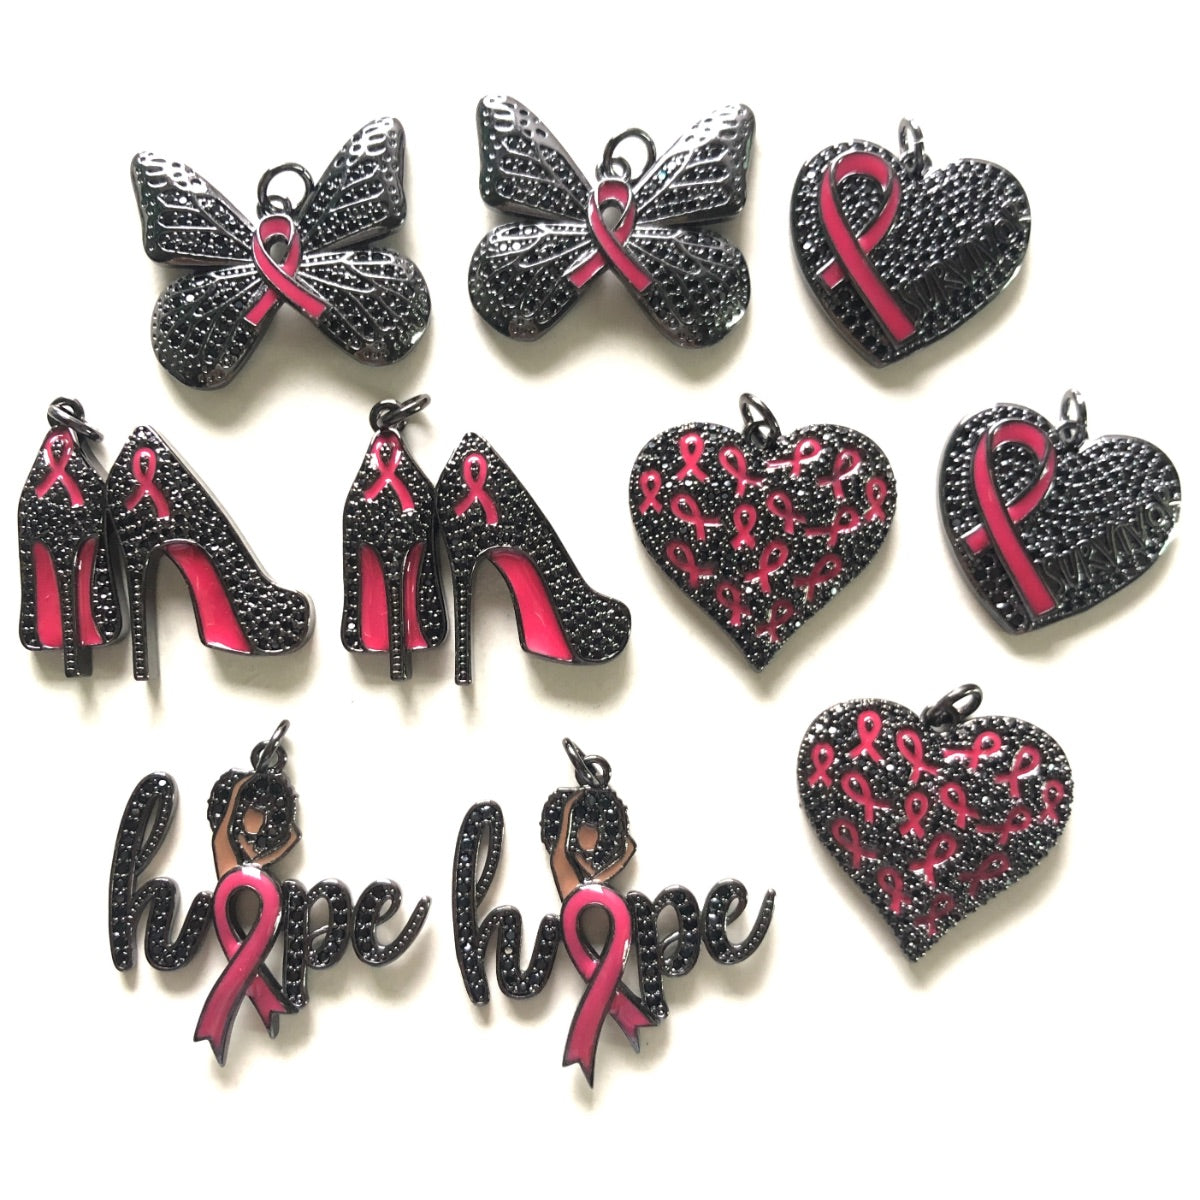 10pcs/lot CZ Pave Pink Ribbon Heart High Heel Butterfly Hope Word Breast Cancer Awareness Charms Bundle Black on Black Set CZ Paved Charms Breast Cancer Awareness Mix Charms New Charms Arrivals Charms Beads Beyond